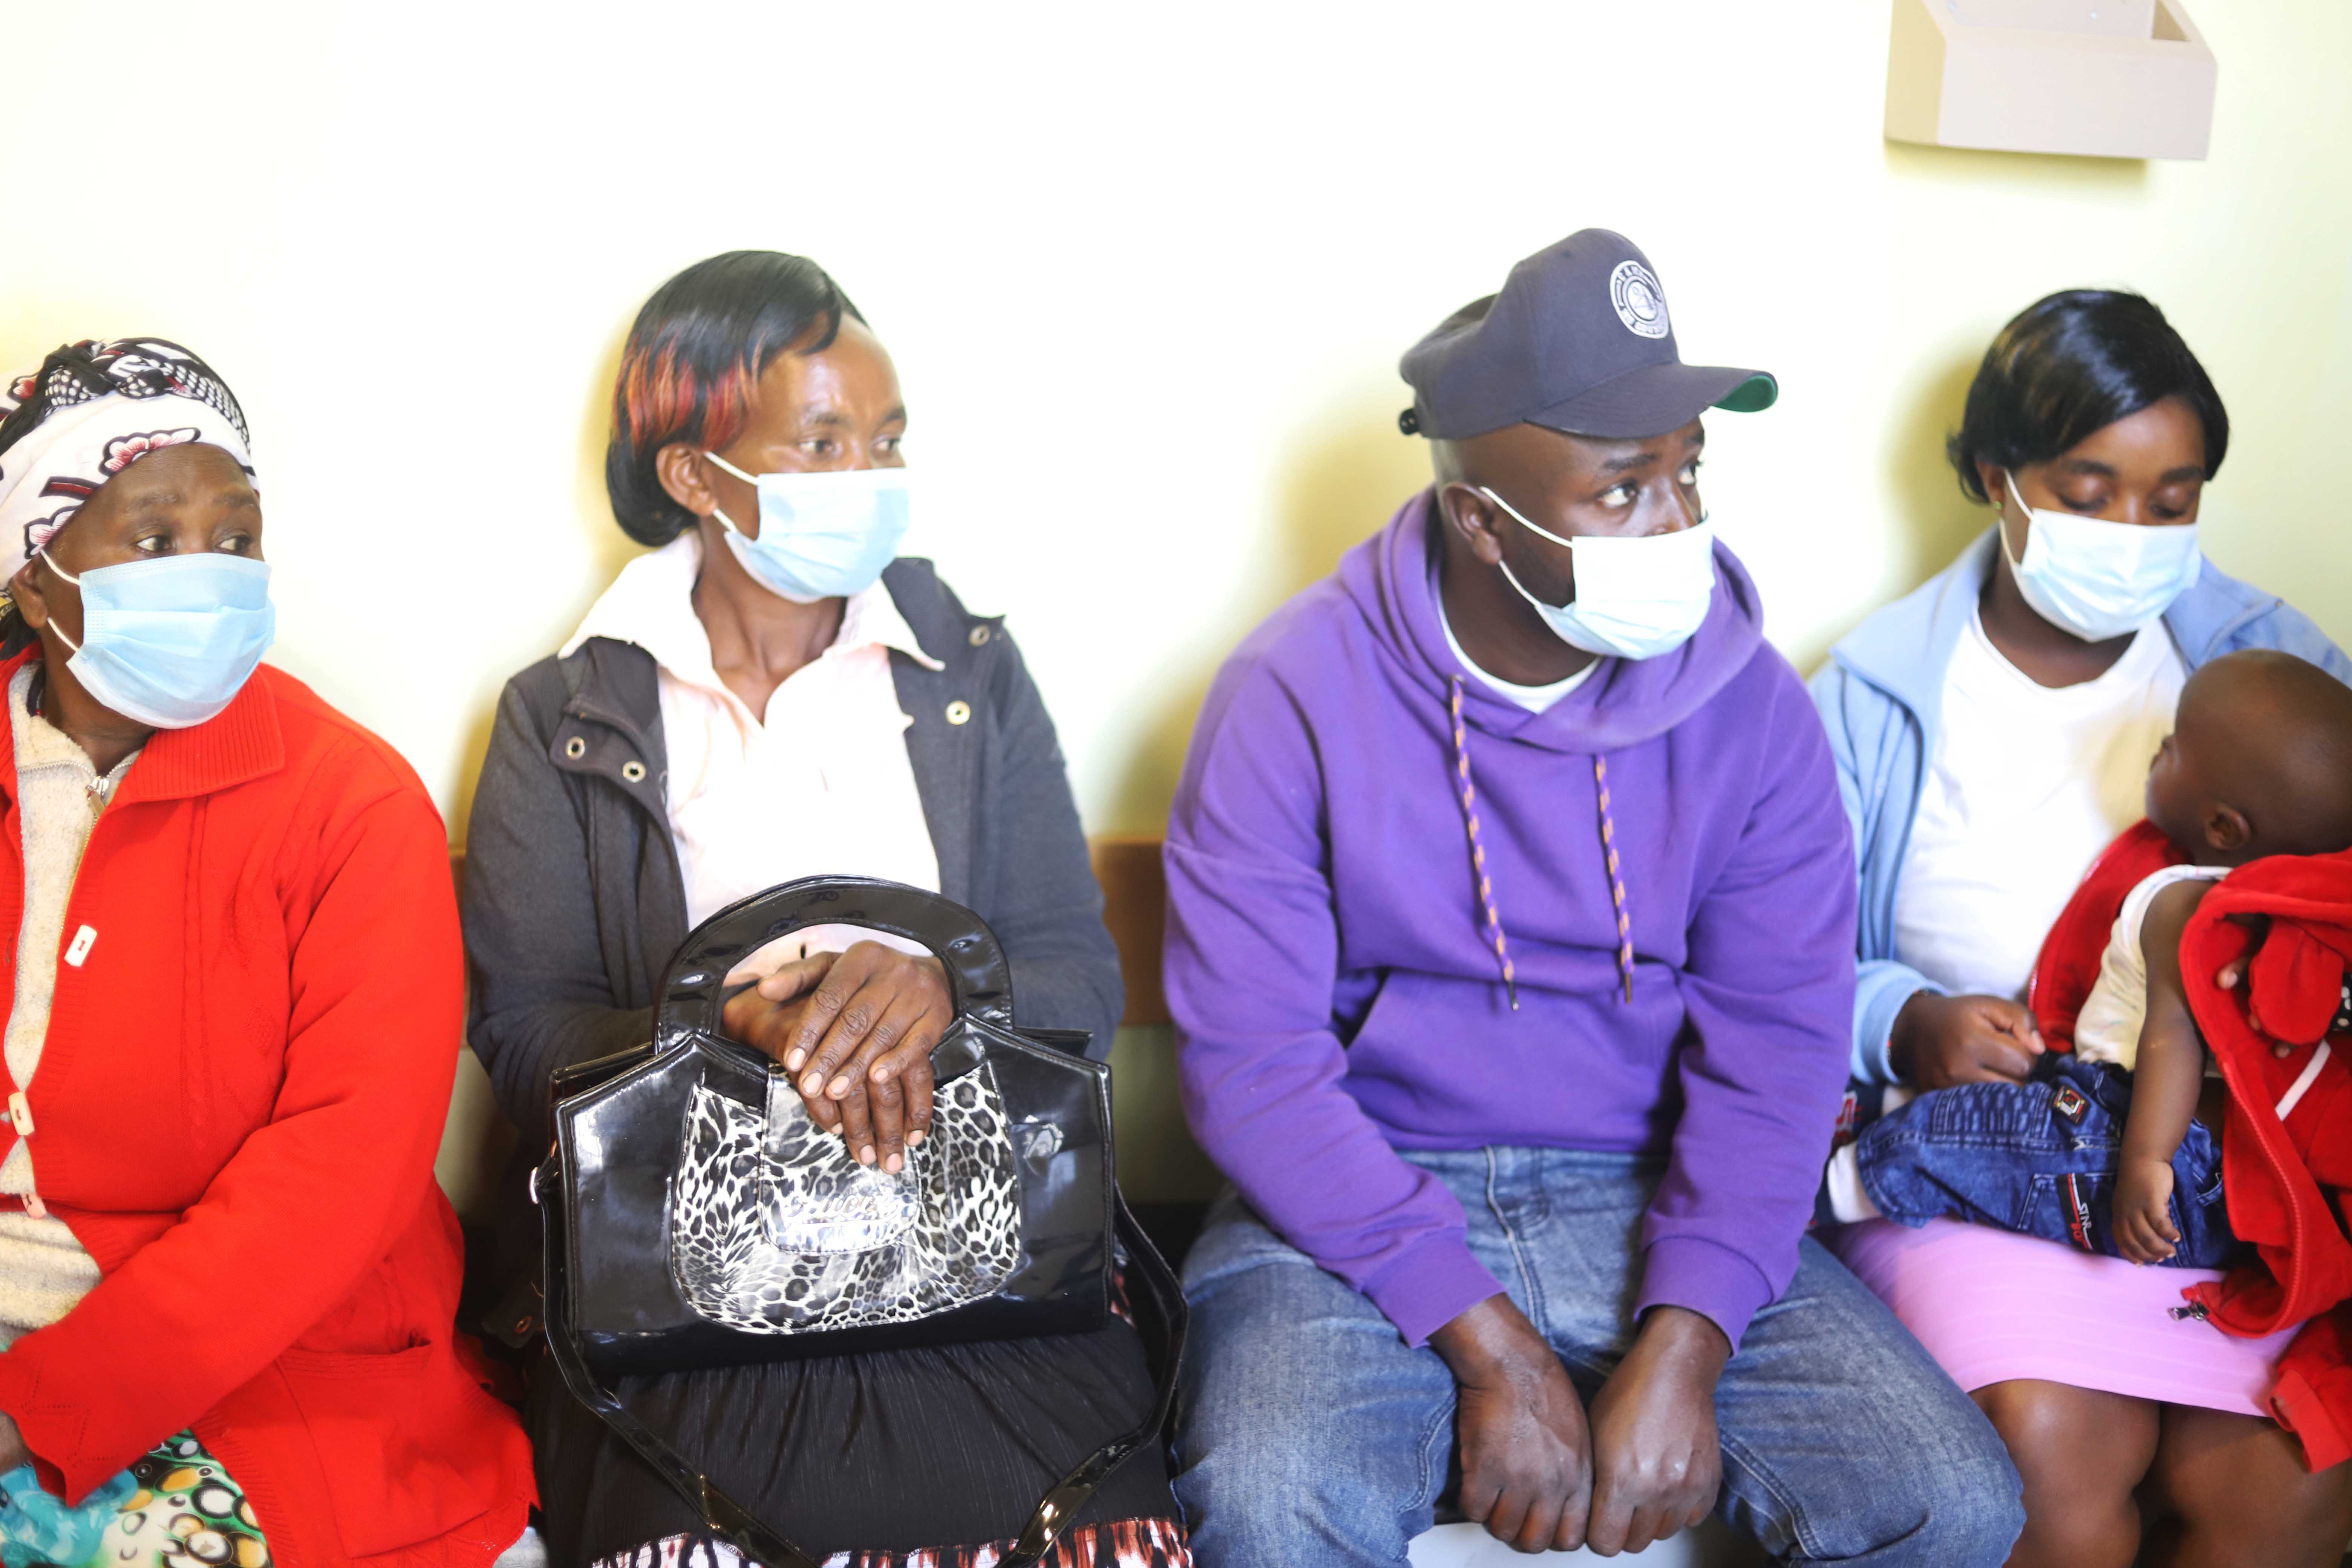 Patients sit on the benches along the hospital corridors as they wait to be attended to by the doctor at St. Joseph Hospital June 2 in Gilgil, in southwestern Kenya. Dr. William Fryda opened the hospital after the fallout between him and the Assumption Si